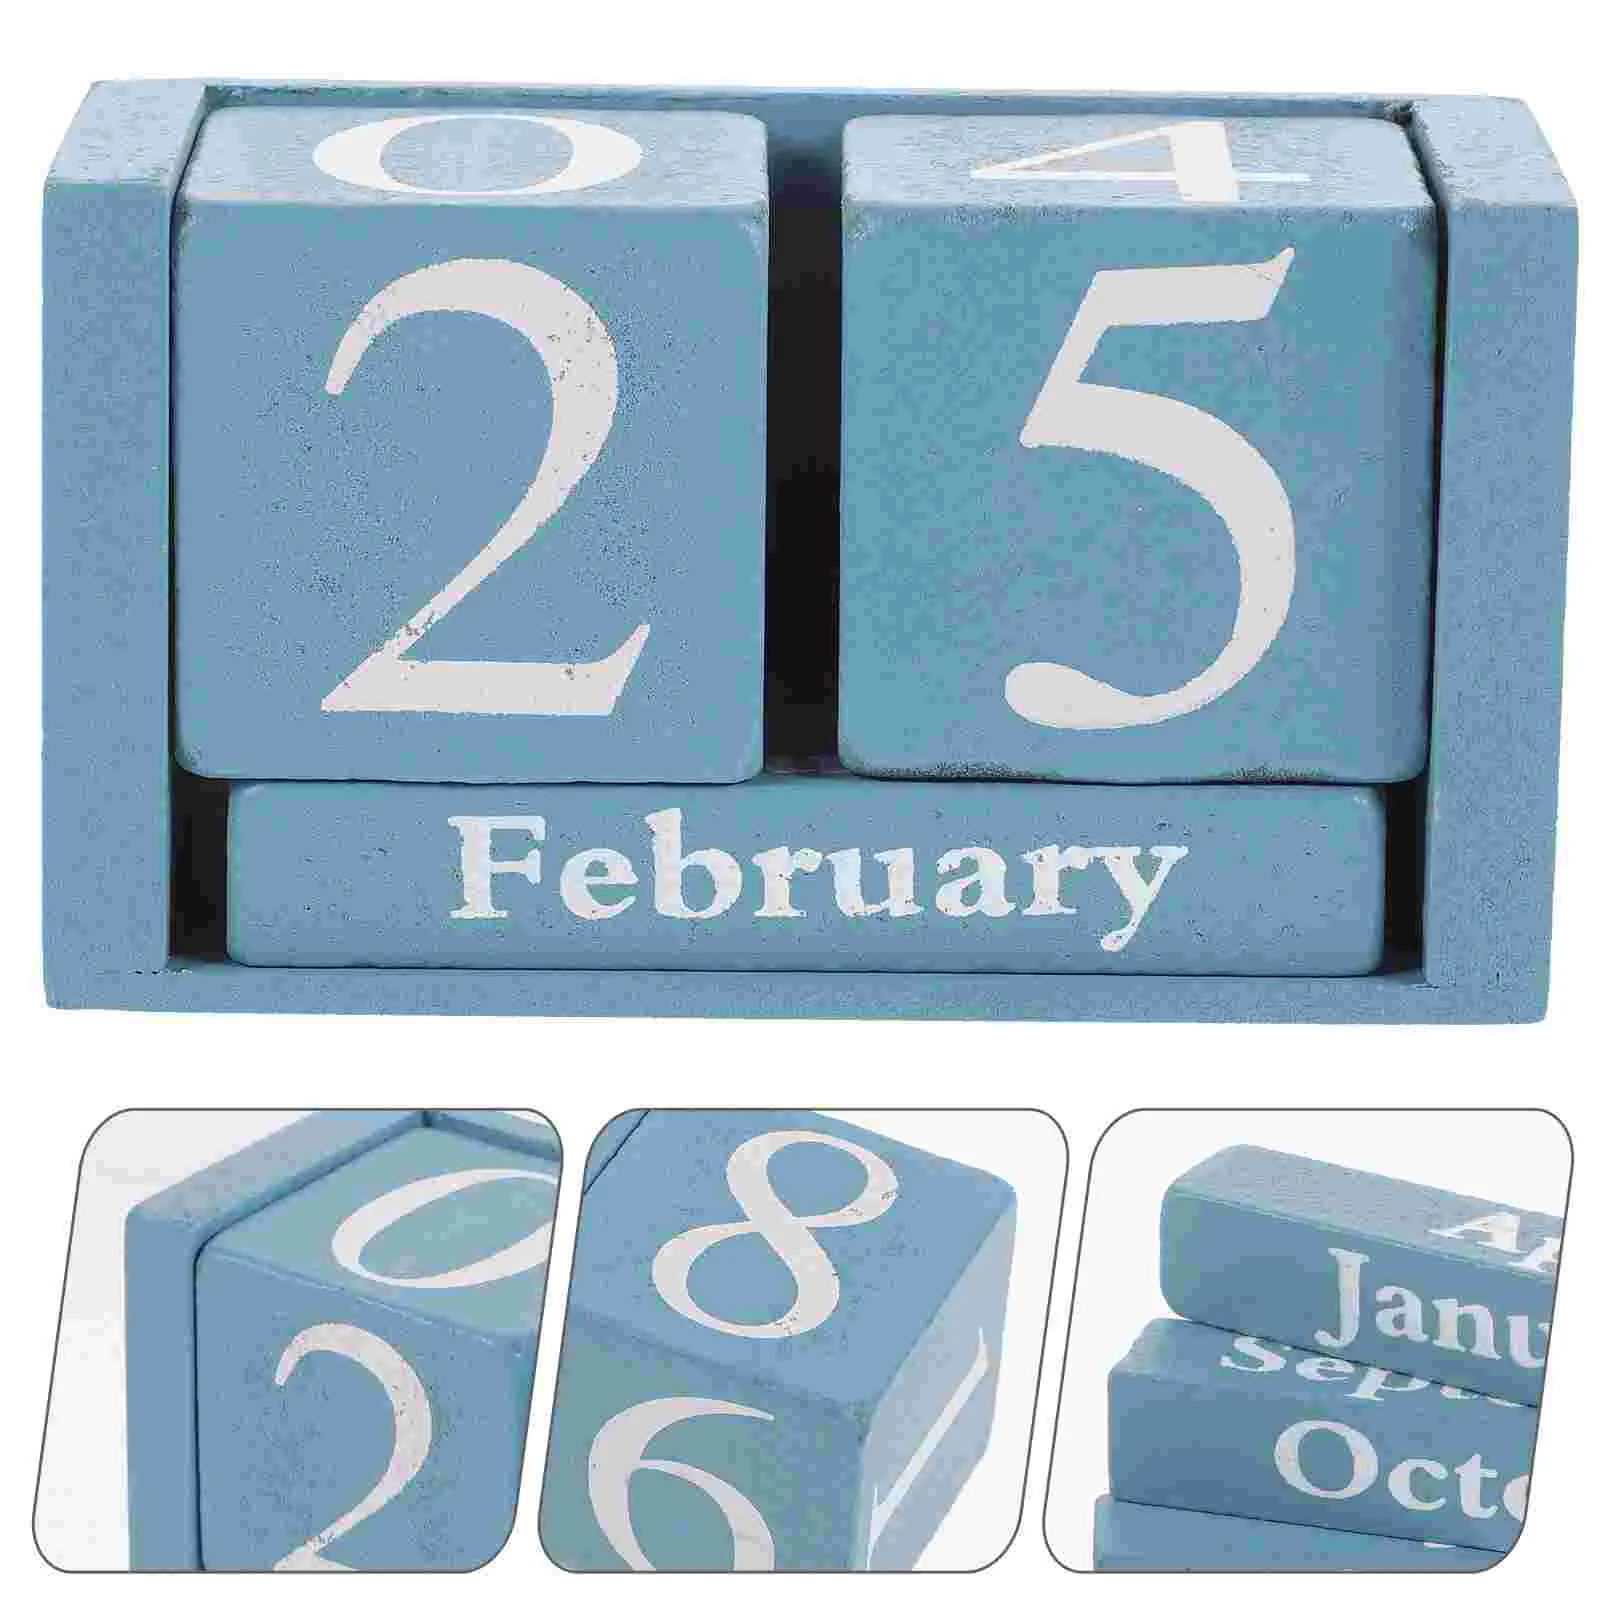 Desktop Calendar Wooden Perpetual Living Room Decoration Daily Chic Date Blocks for Office Decorations Work Household Tabletop scarf ring chic fine workmanship oblong shape scarf decoration party shawl ring scarf accessory scarf fastener scarf buckle